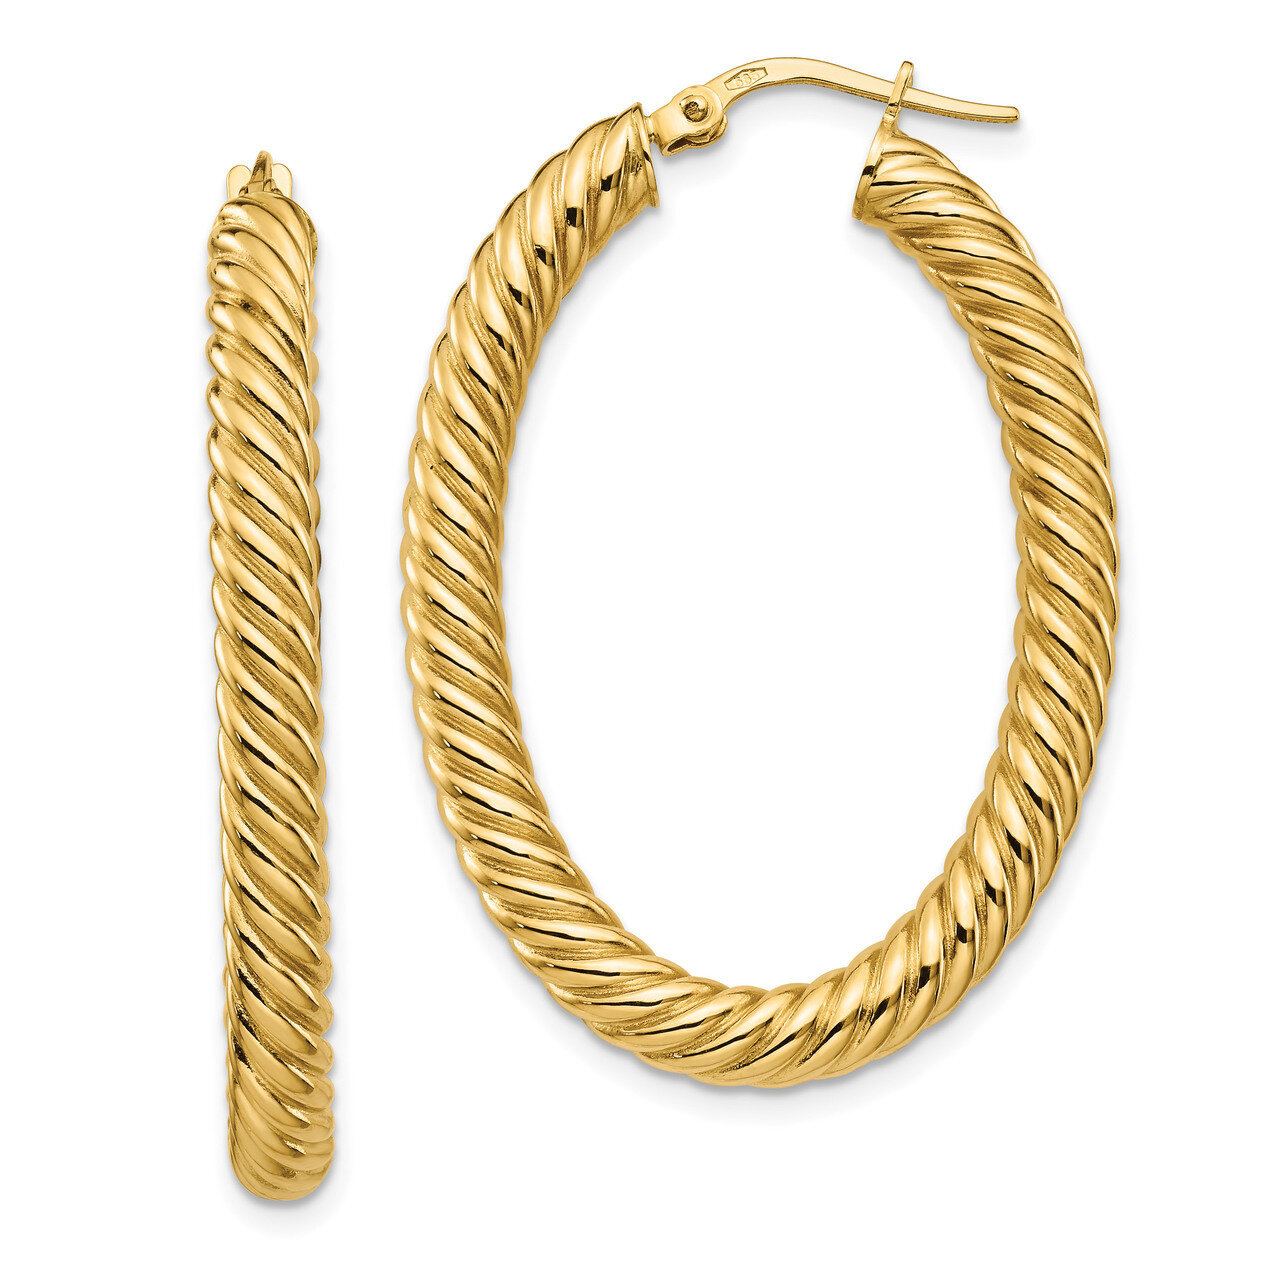 Oval Hoop Earrings 14k Gold Polished Twisted HB-LE1812